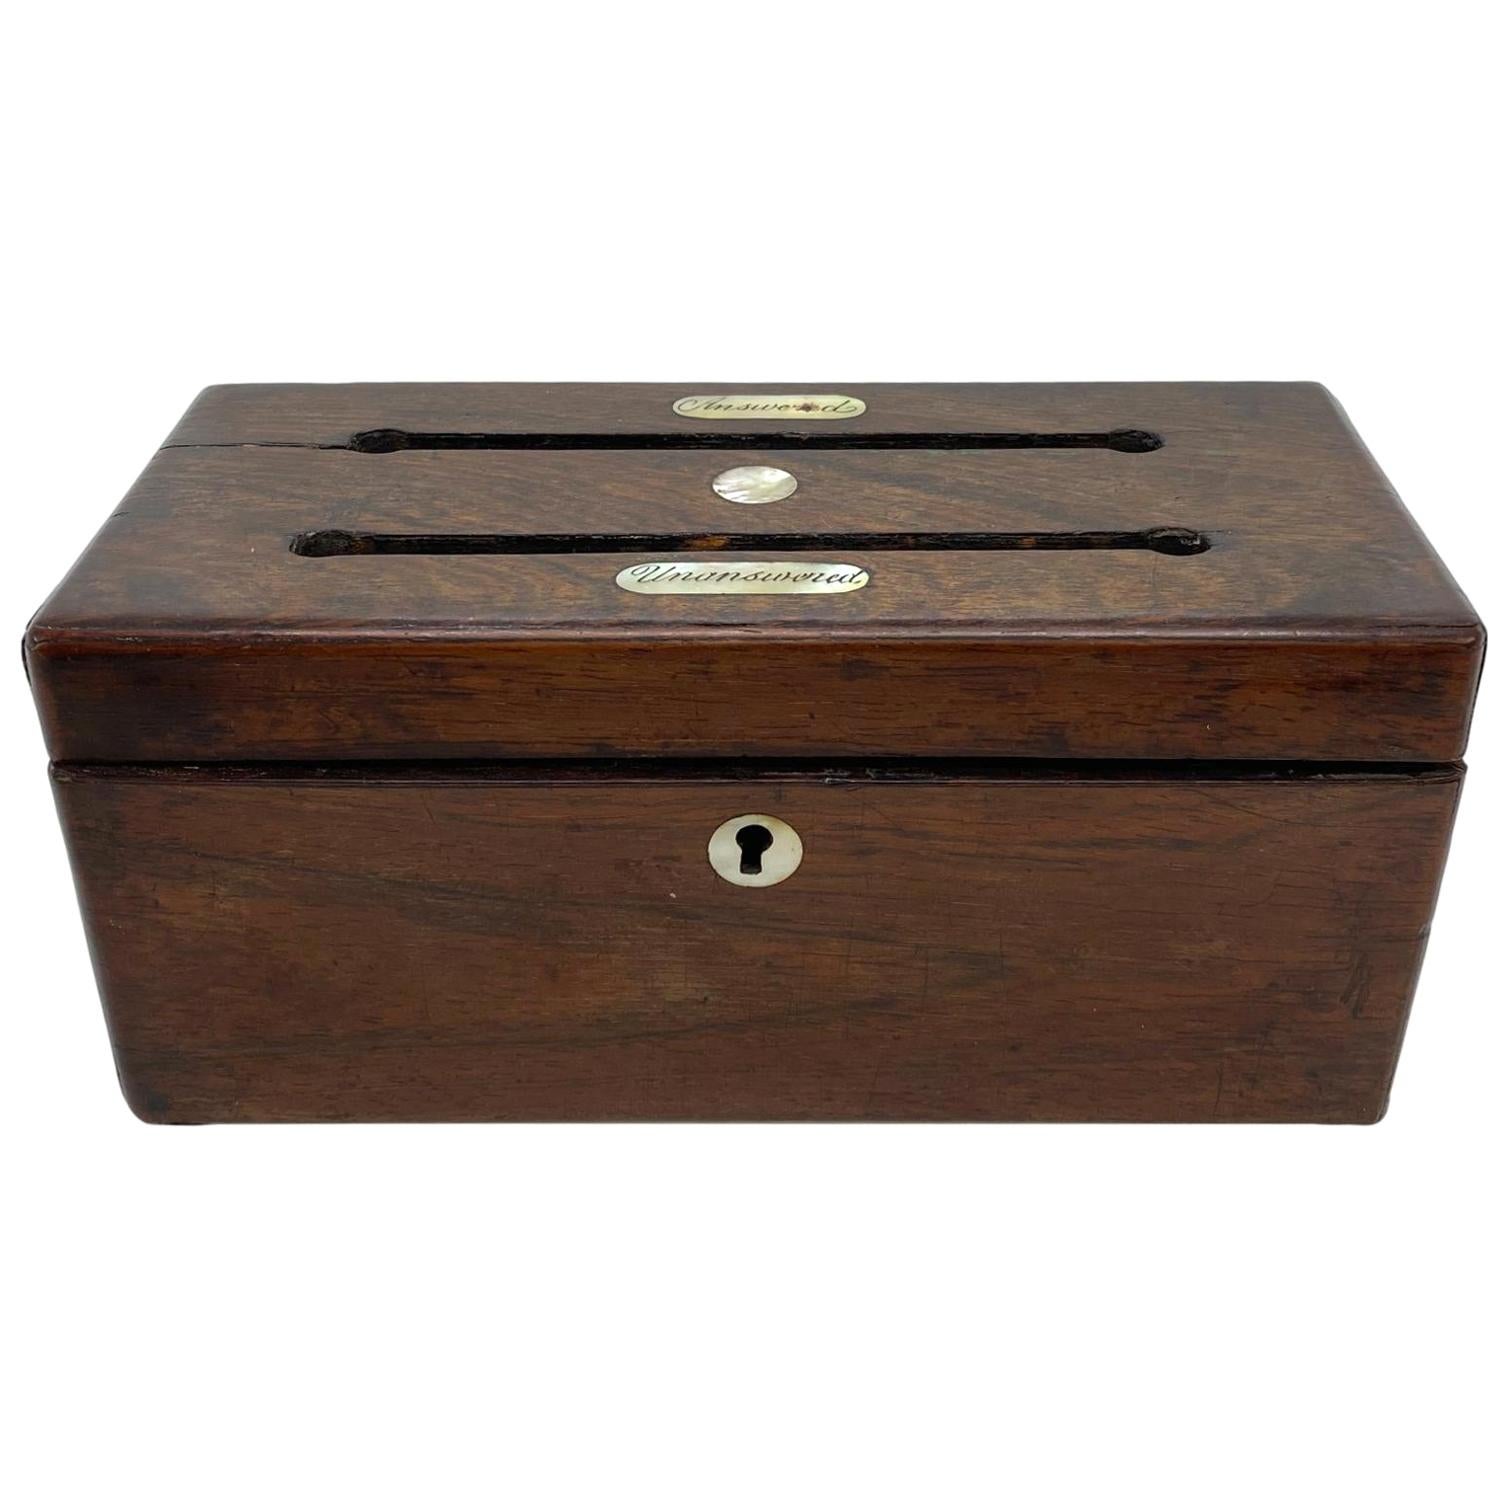 Antique Rosewood Letter Box with Mother-of-Pearl Plaques, English, ca. 1860